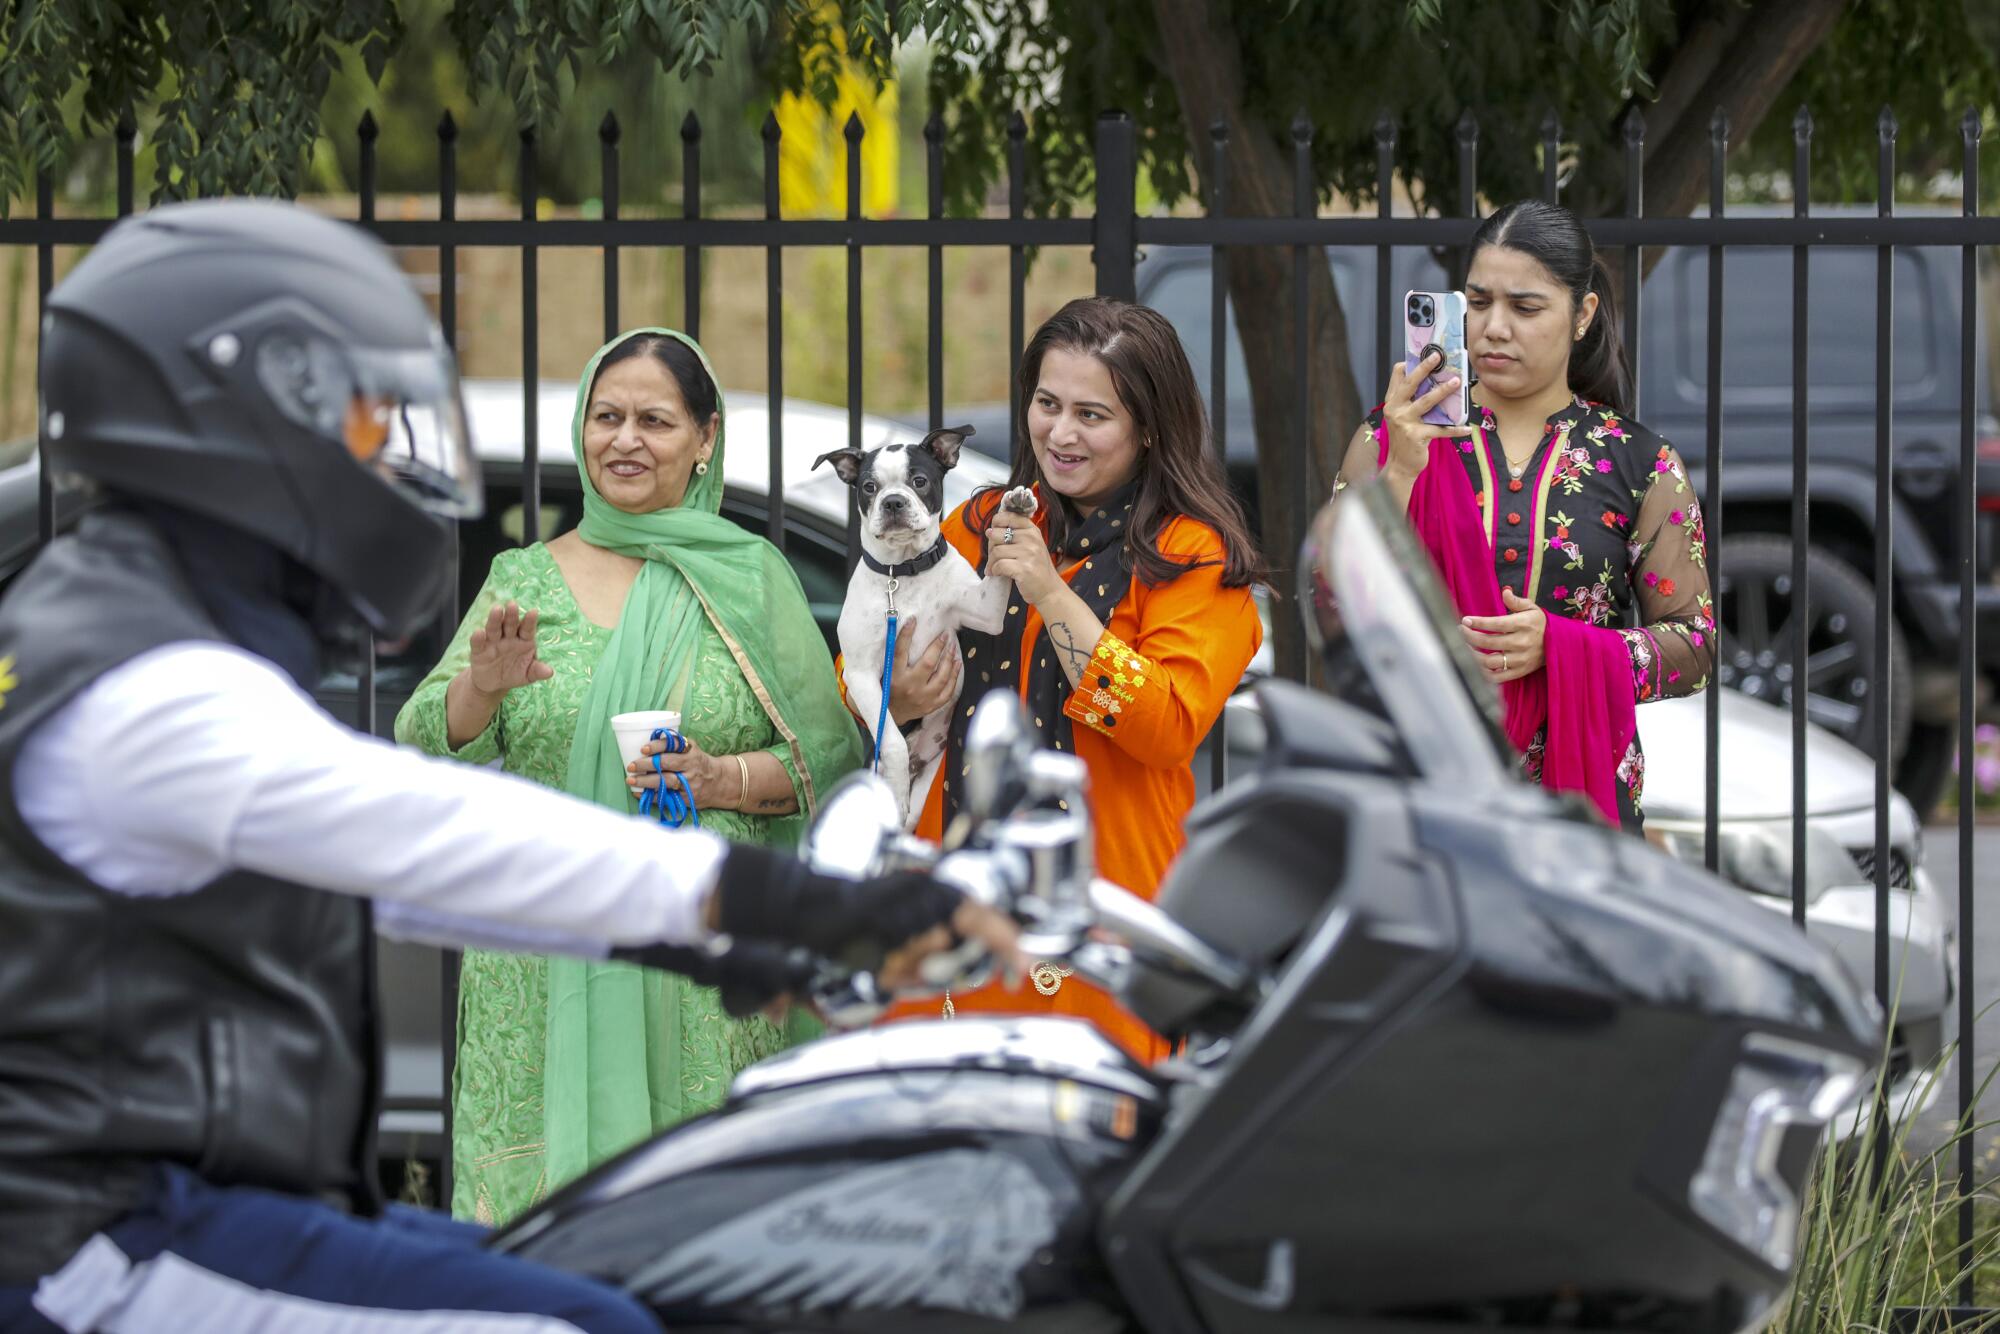 Family members say goodbye to riders of the Sikh Motorcycle Club USA  